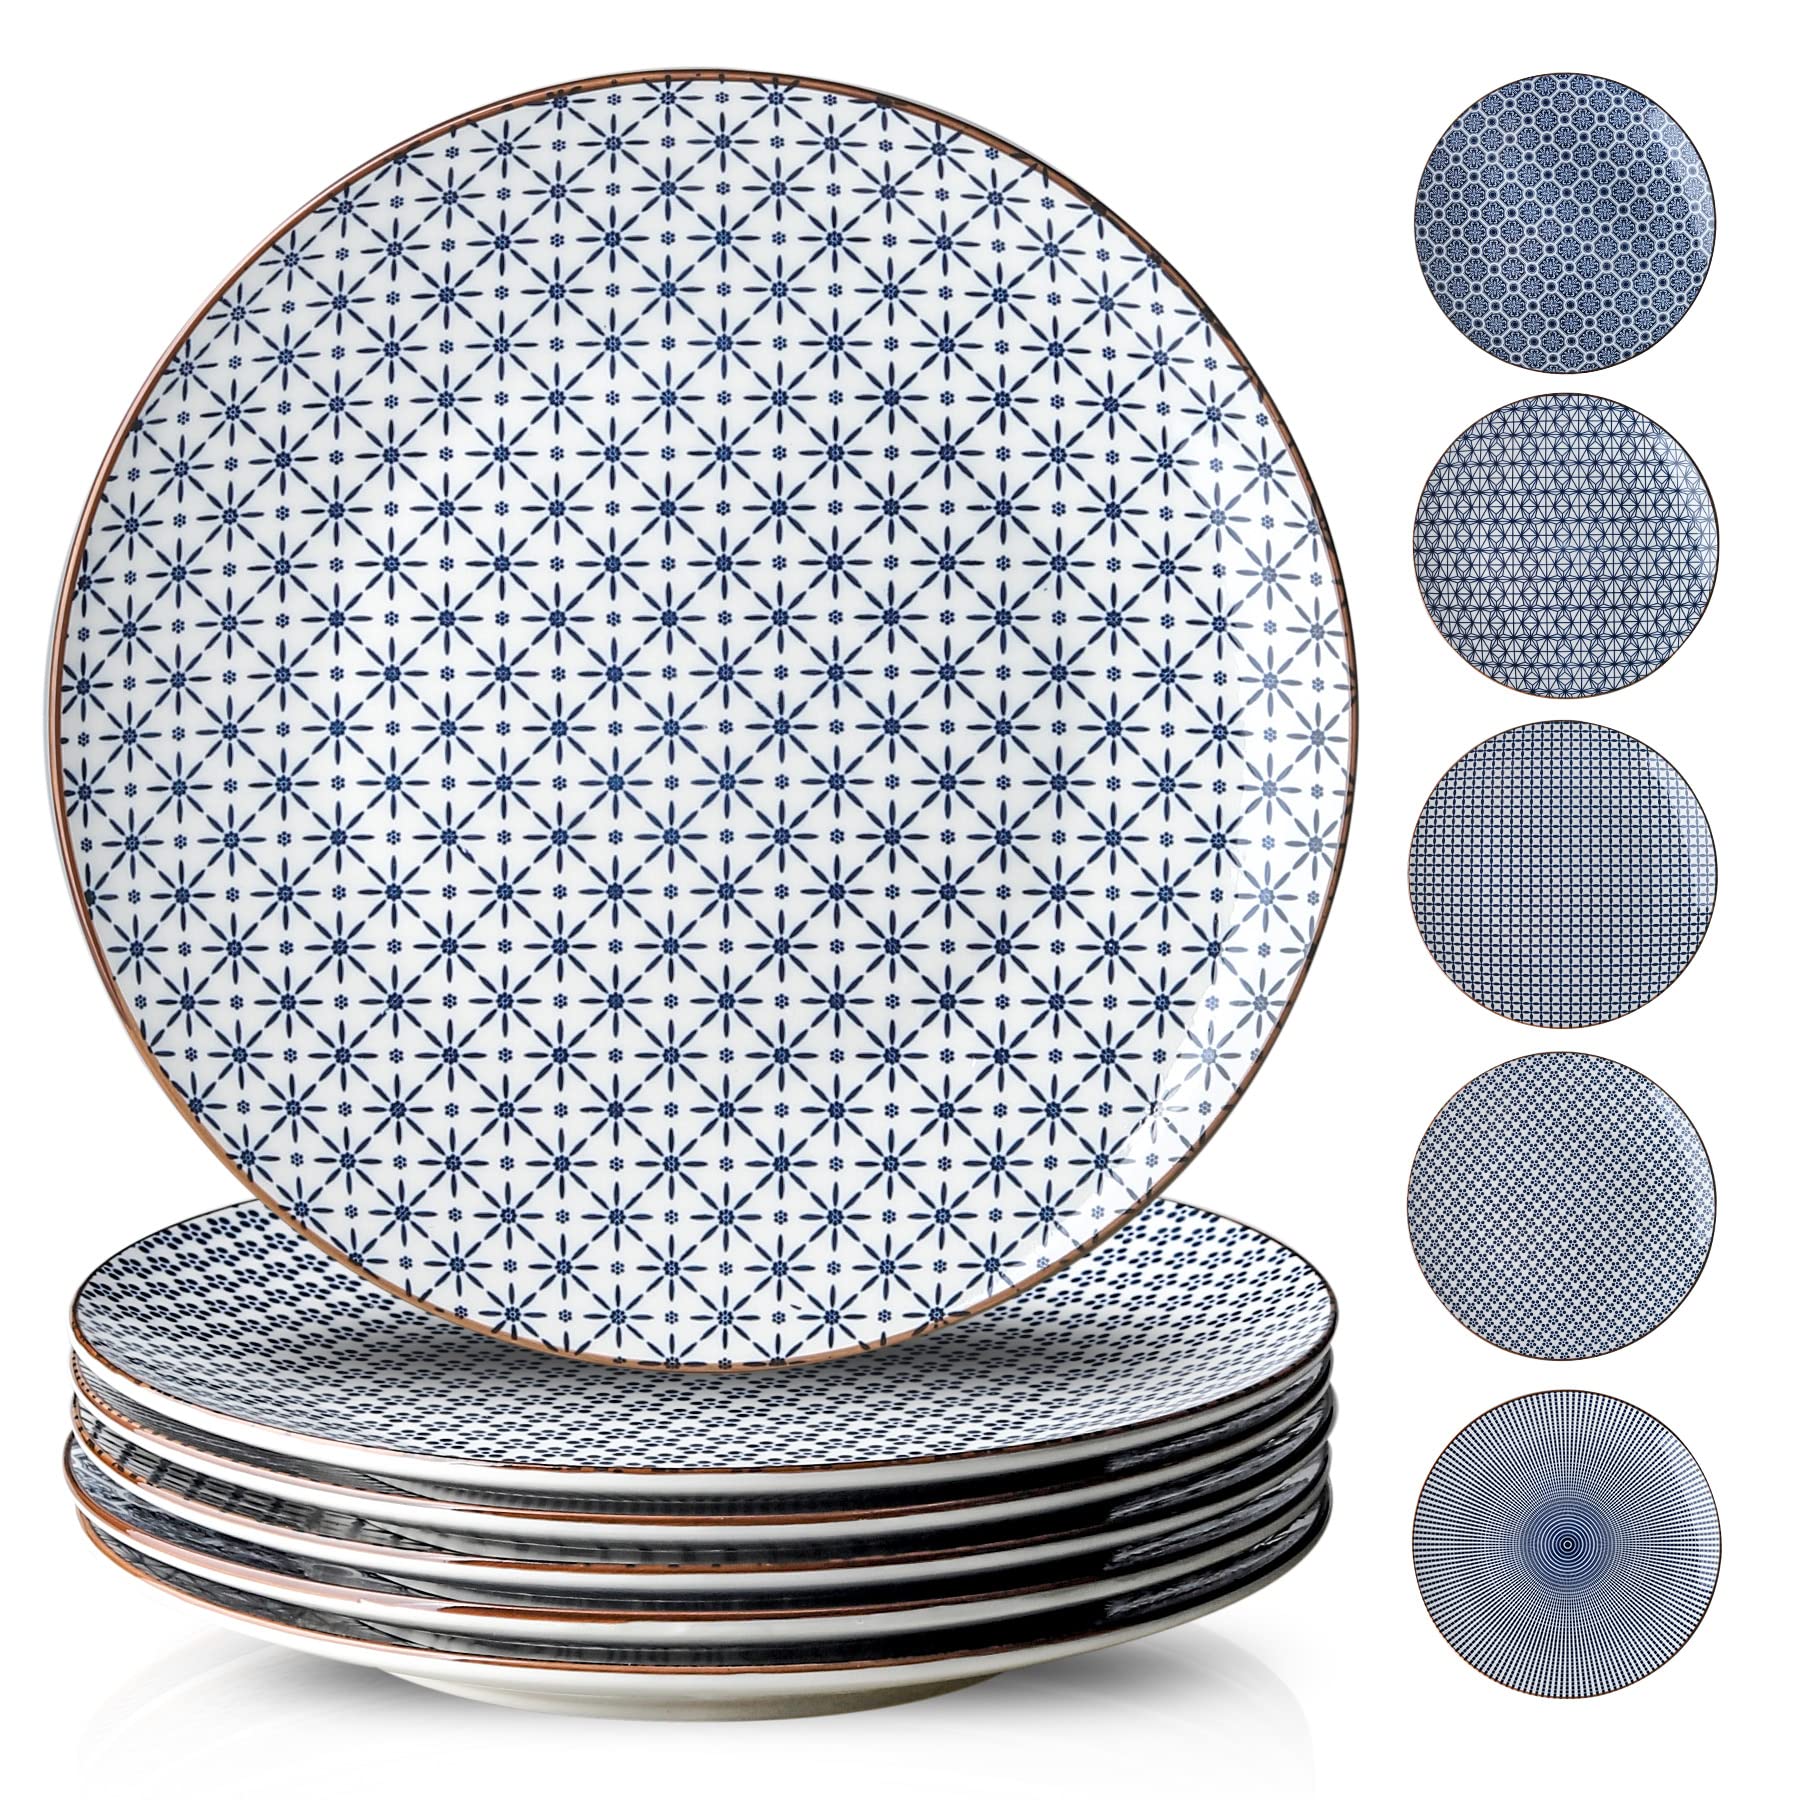 YELLOYA Japanese Large Dinner Plates Set 10.6 Inch-Salad Serving Dishes Set of 6-Blue and White Plates,Dishwasher & Microwave Safe, Assorted Pattern Plates